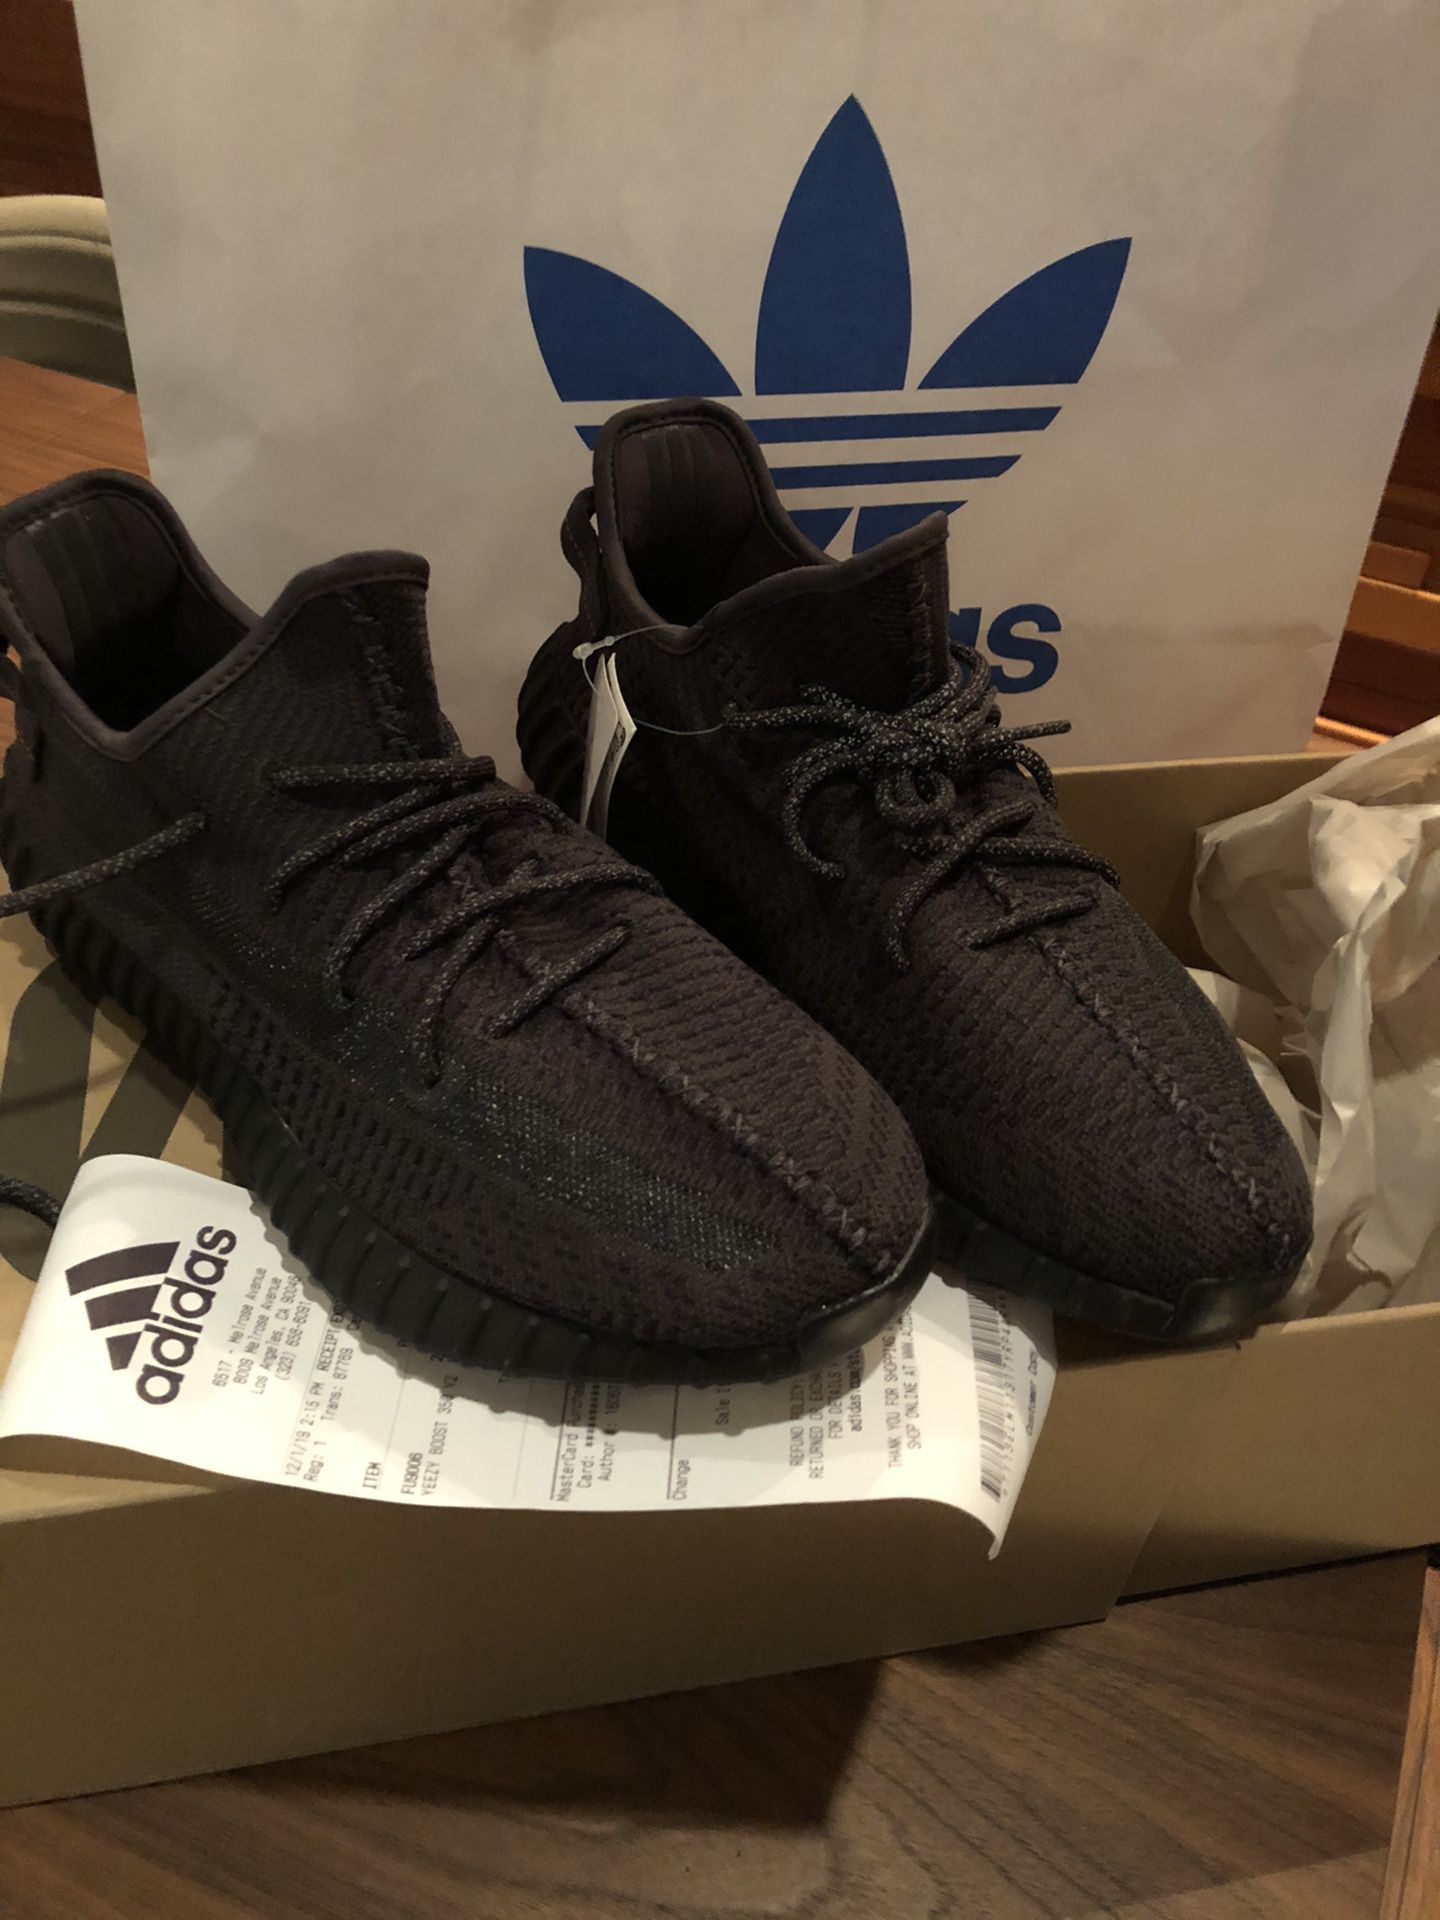 Yeezy Boost 350 Non-Reflective size 11 with receipt from Adidas